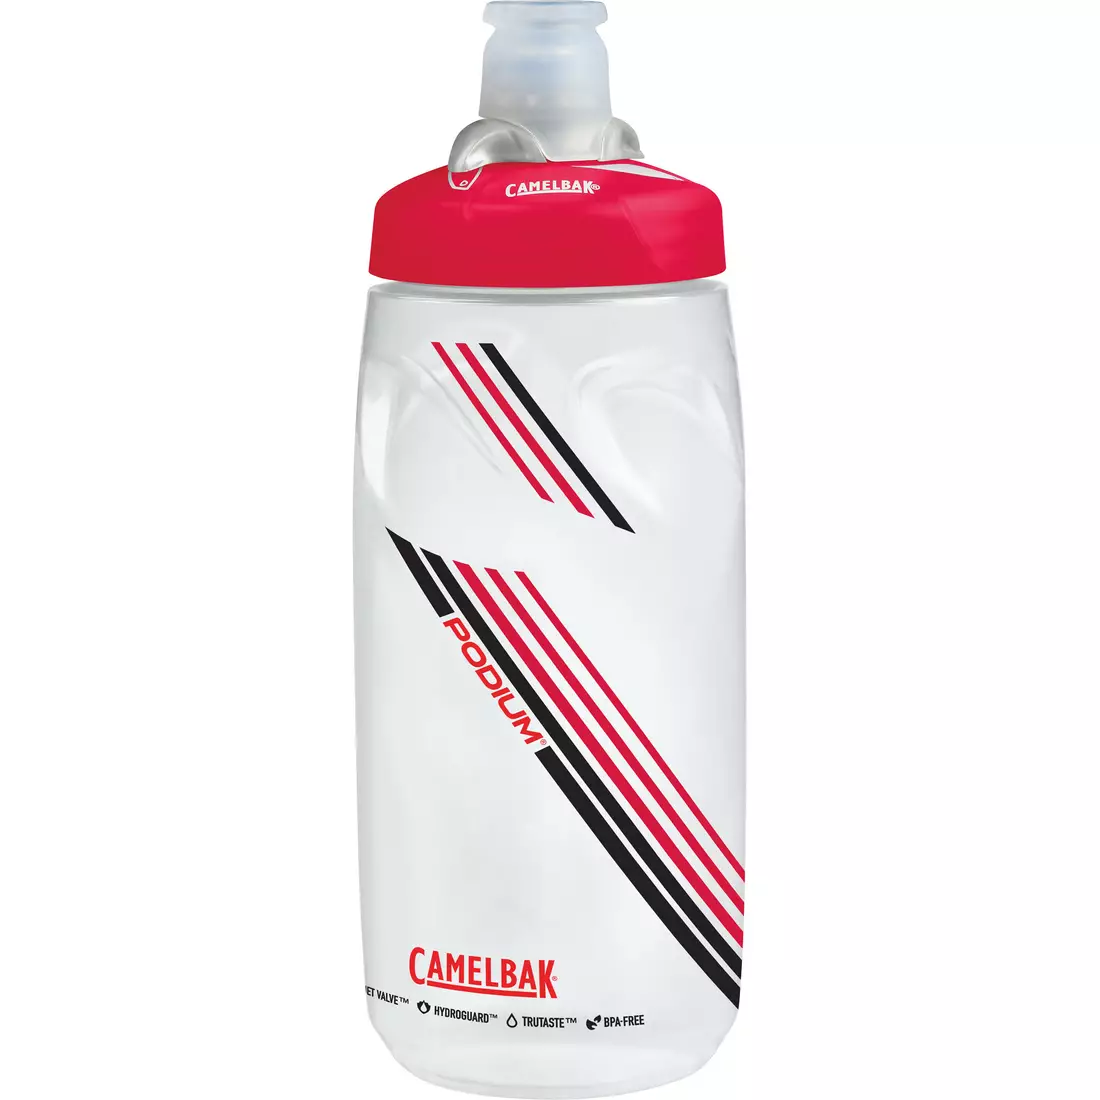 Camelbak SS17 Podium bicycle water bottle 21oz / 620 ml Clear Red